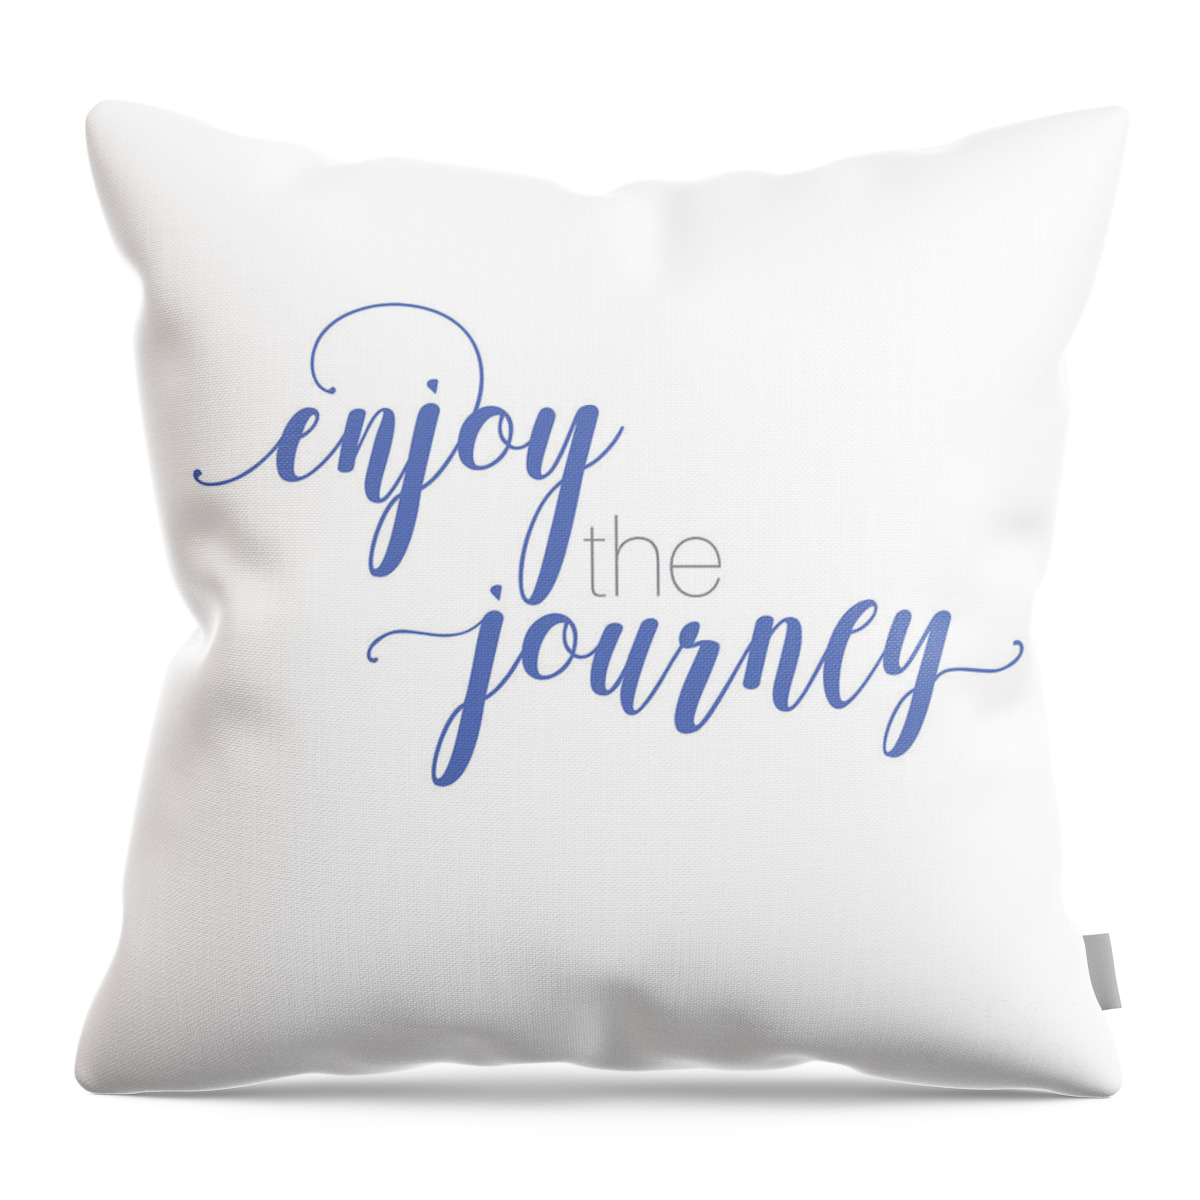 Enjoy The Journey Throw Pillow featuring the digital art Enjoy the Journey by Laura Kinker